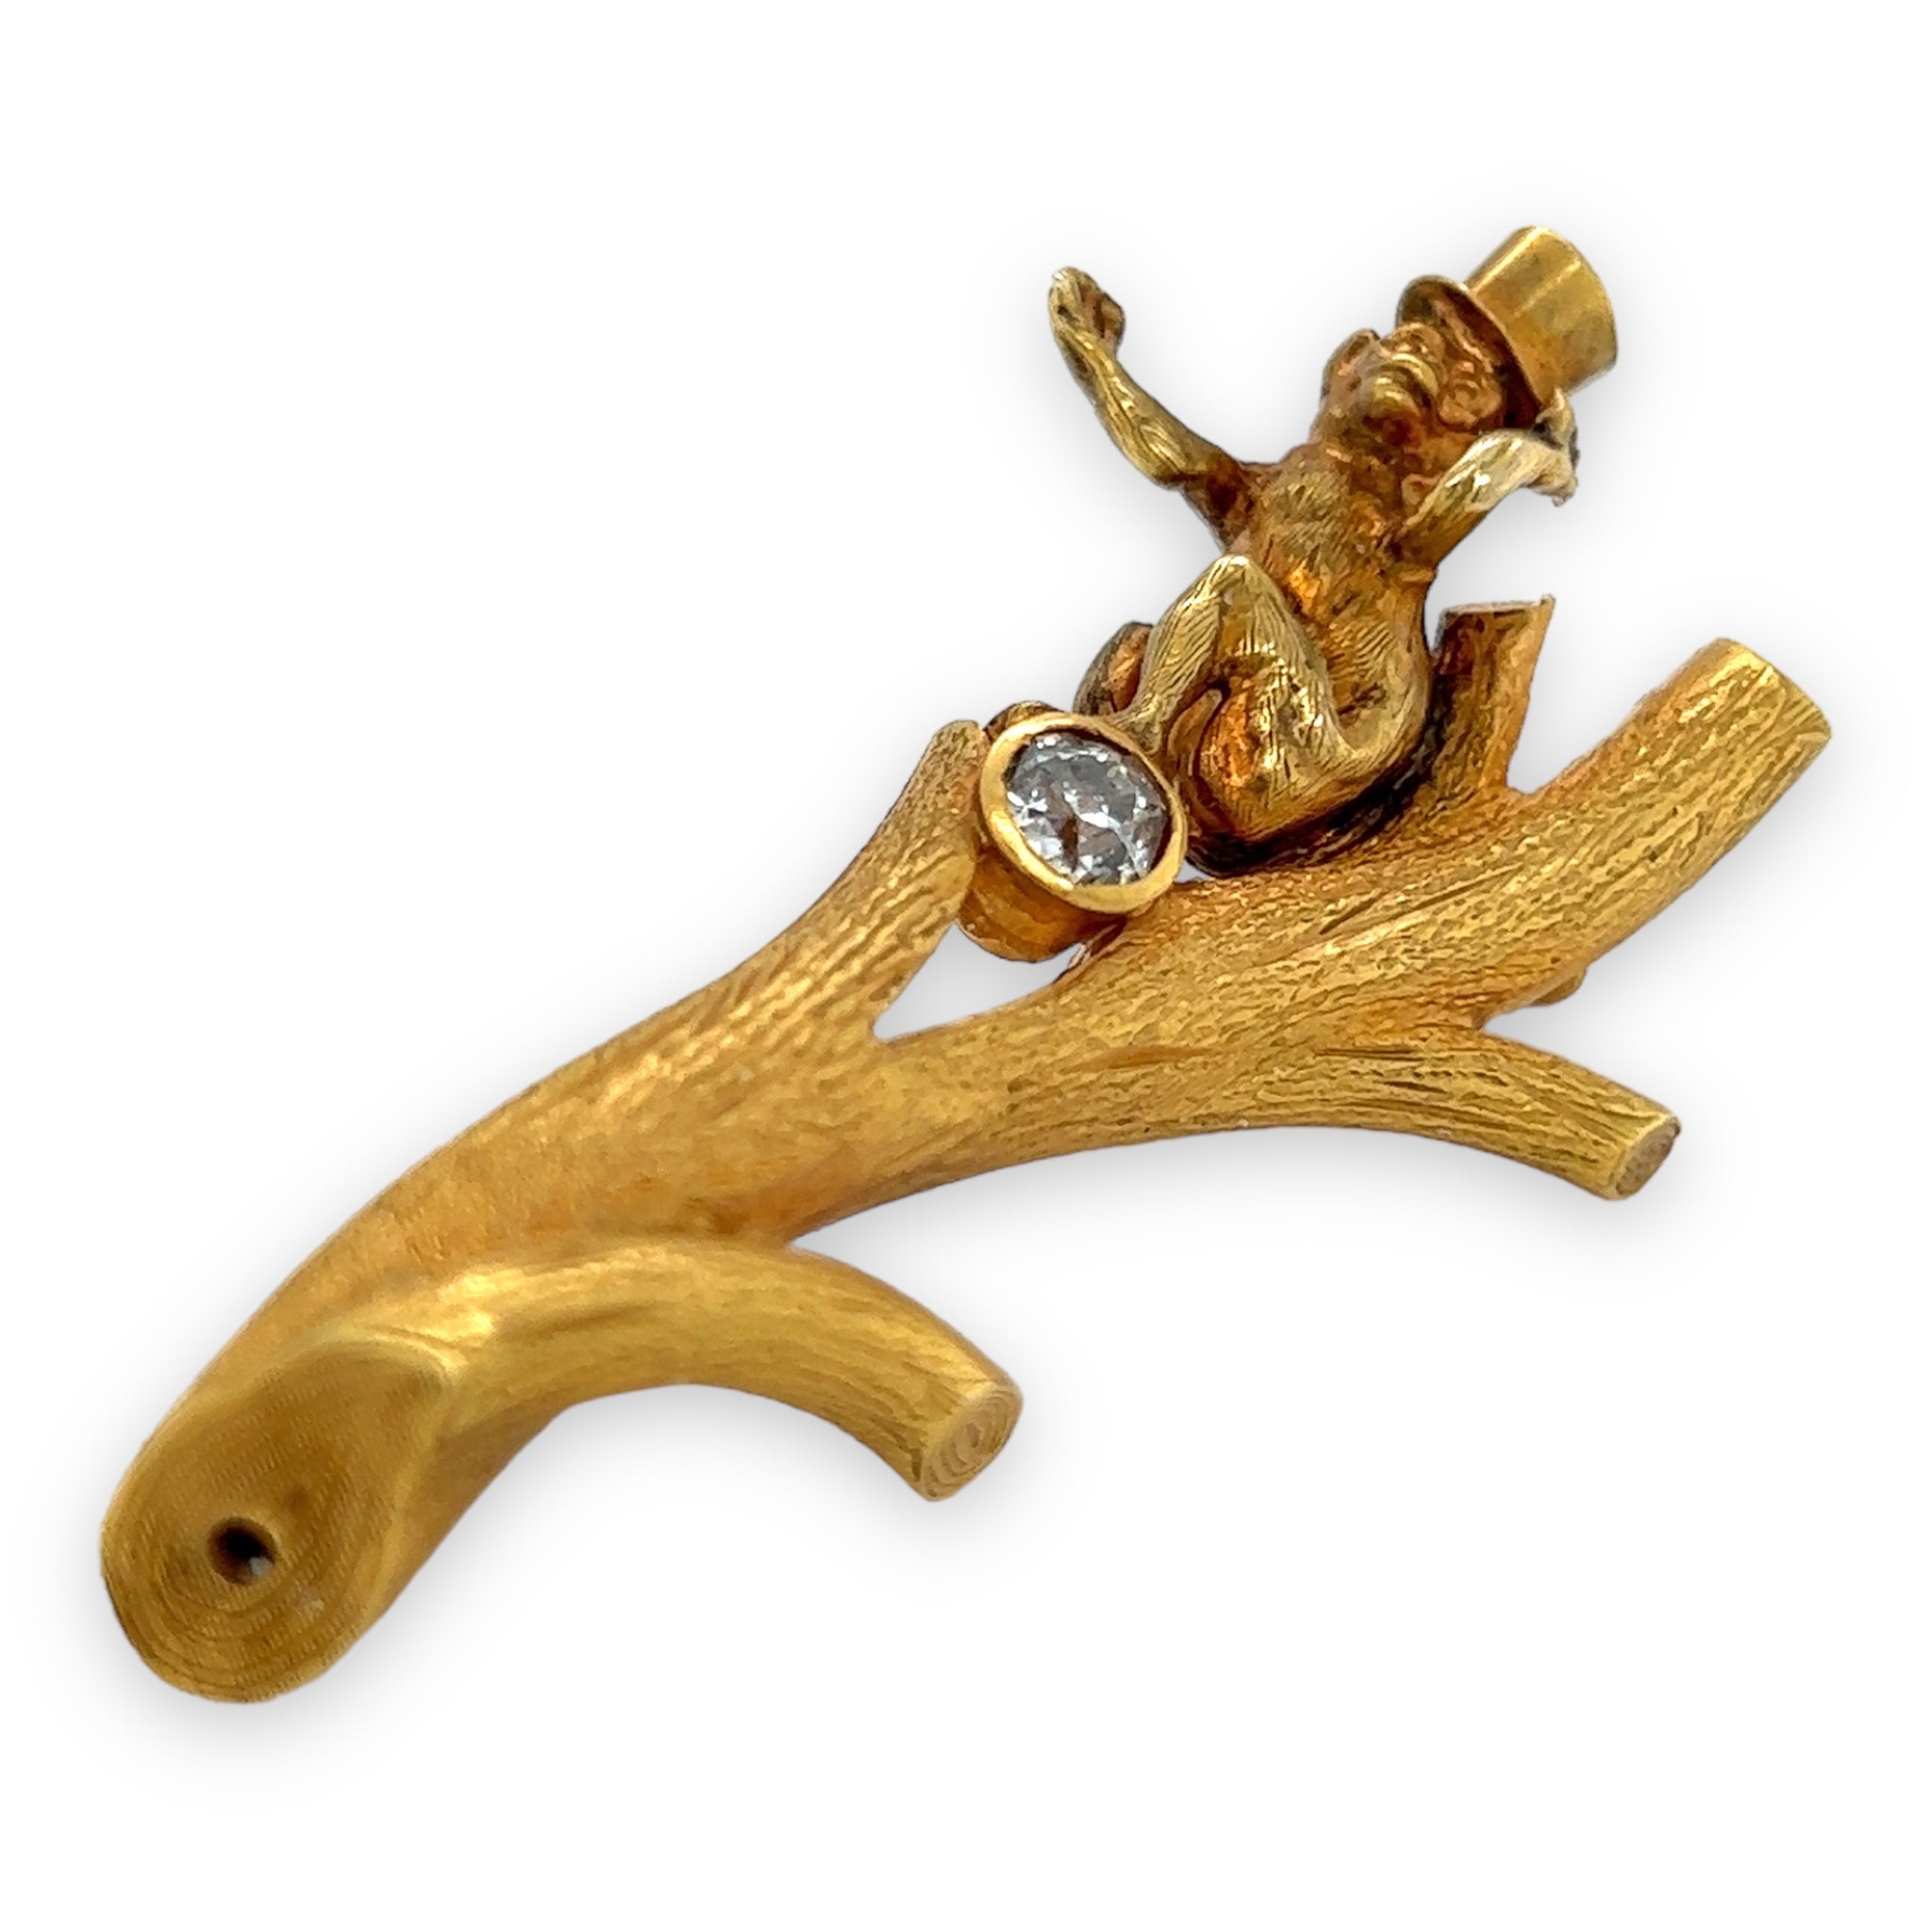 Victorian 15ct Yellow Gold & Diamond Monkey with Top Hat Brooch - Wildsmith Jewellery Brooches & Lapel Pins